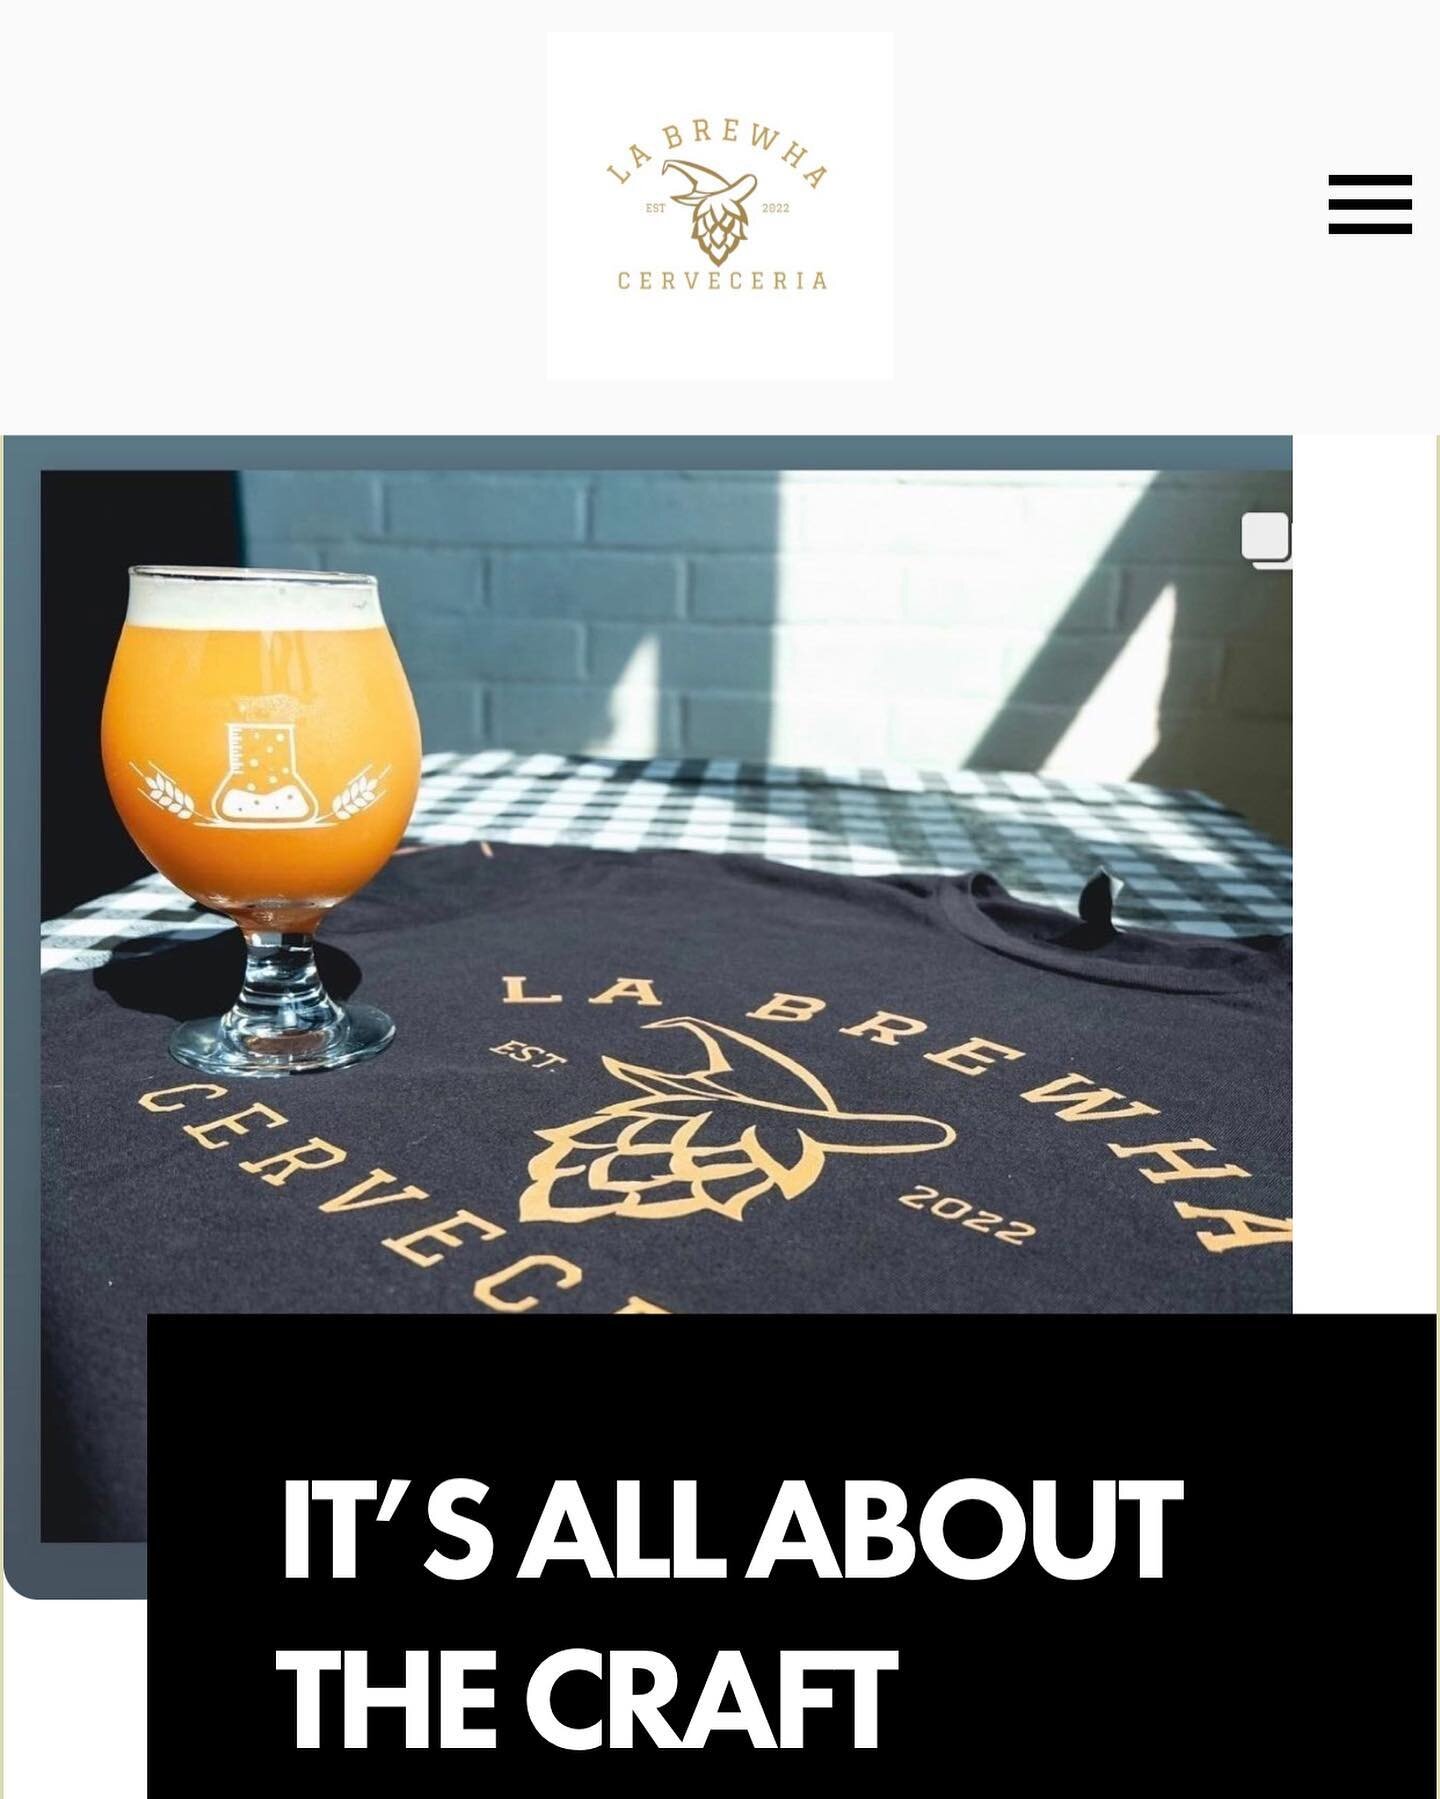 Our website is now up! Stay updated with new beer releases and beer locations through our website and by following us on Instagram. #beerstagram #labrewha #itsallaboutthecraft #centralvalleybeer #bakersfieldbeer #bakobeer #beerwebsite